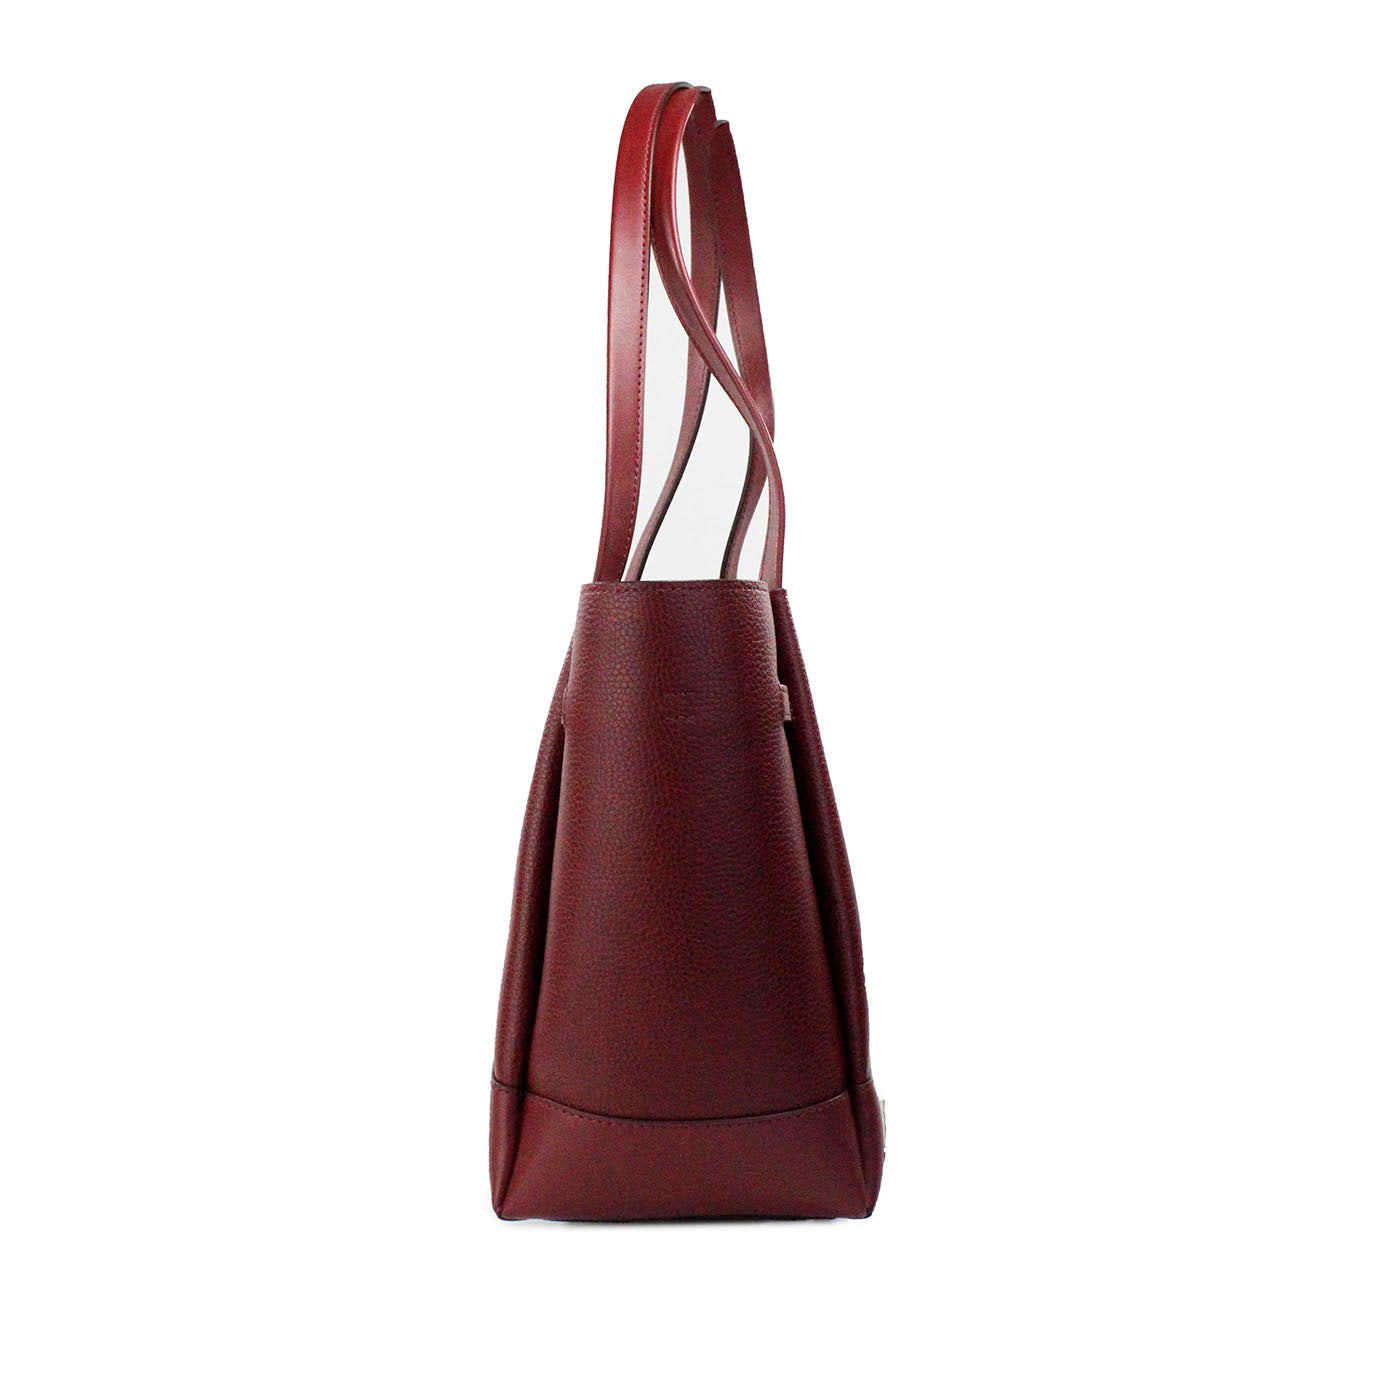 Reed Large Dark Cherry Leather Belted Tote Shoulder Bag Purse - Divitiae Glamour